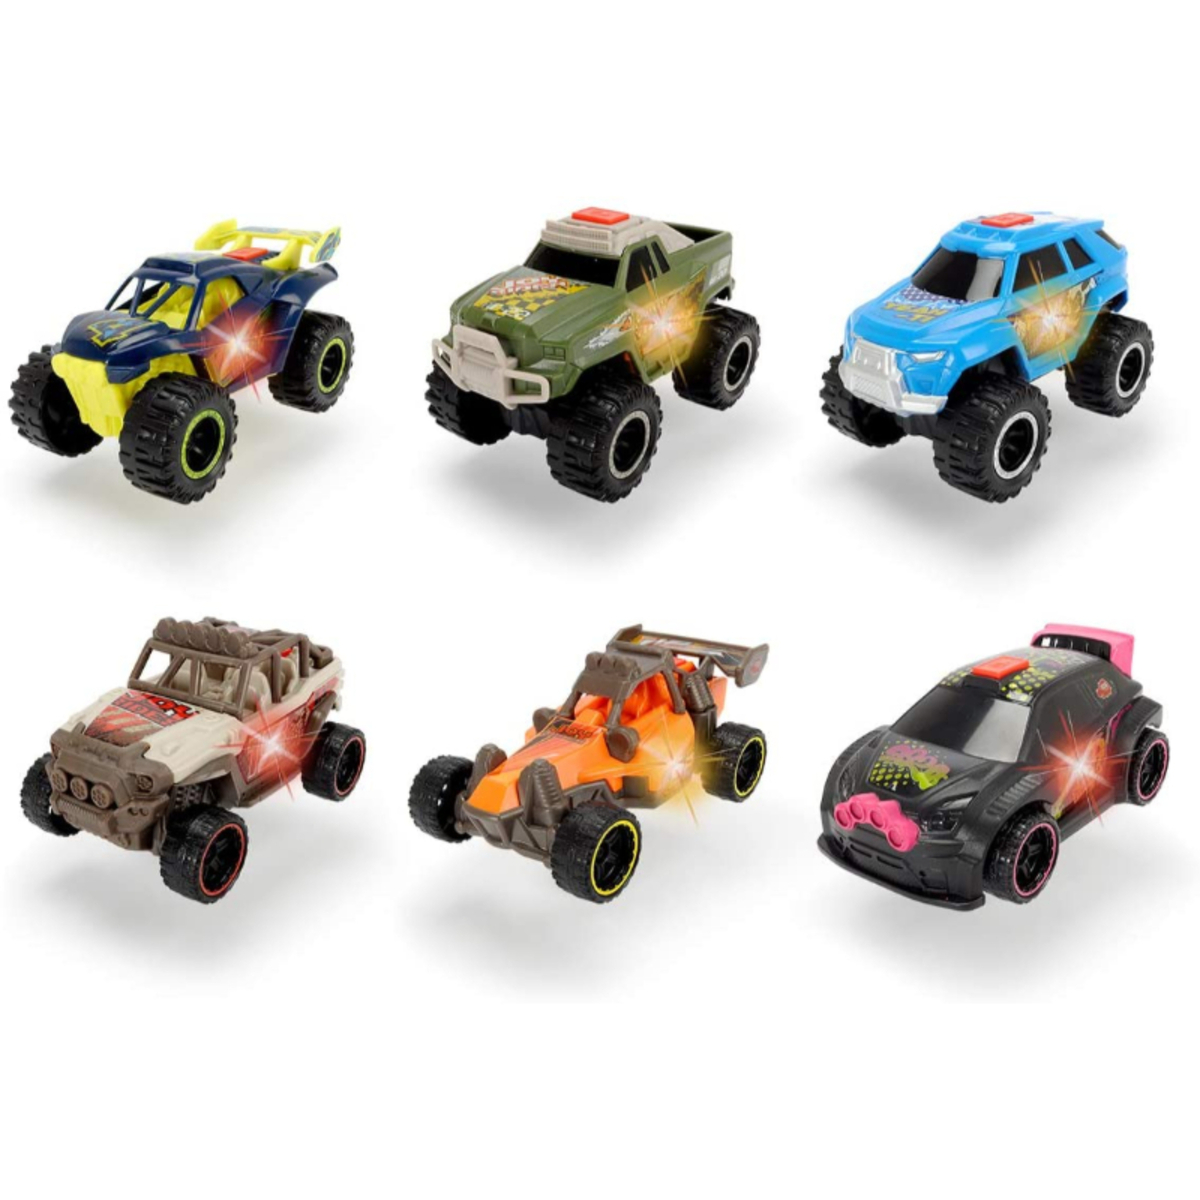 Dickie Toys Joy Rider Vehicle with Light and Sound, 6 Models, Assorted, 203761000